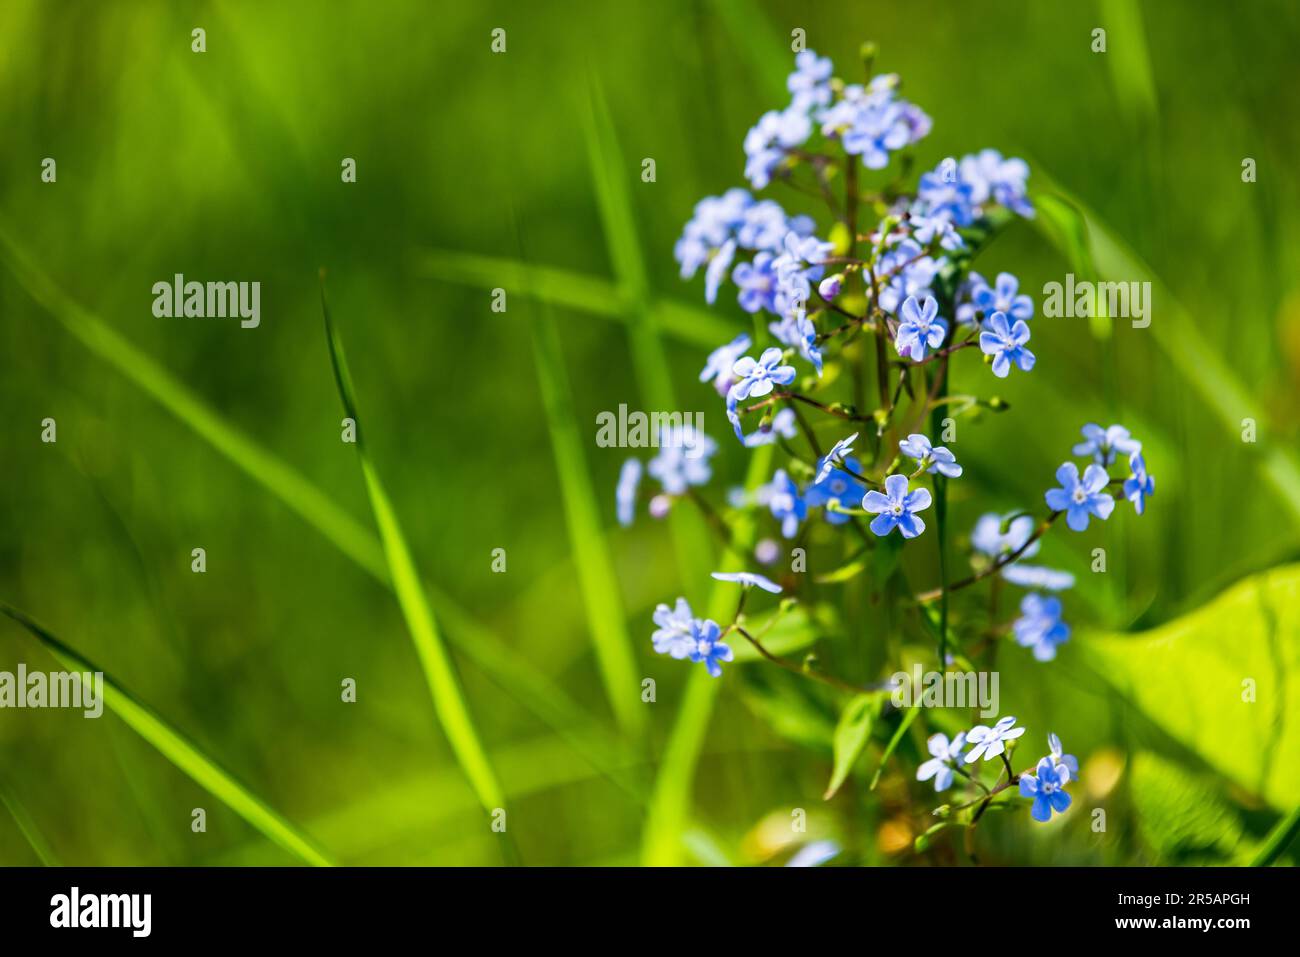 Forget Me Not, Myosotis is a genus of flowering plants in the family Boraginaceae. Macro photo with soft selective focus of blue flowers over blurred Stock Photo